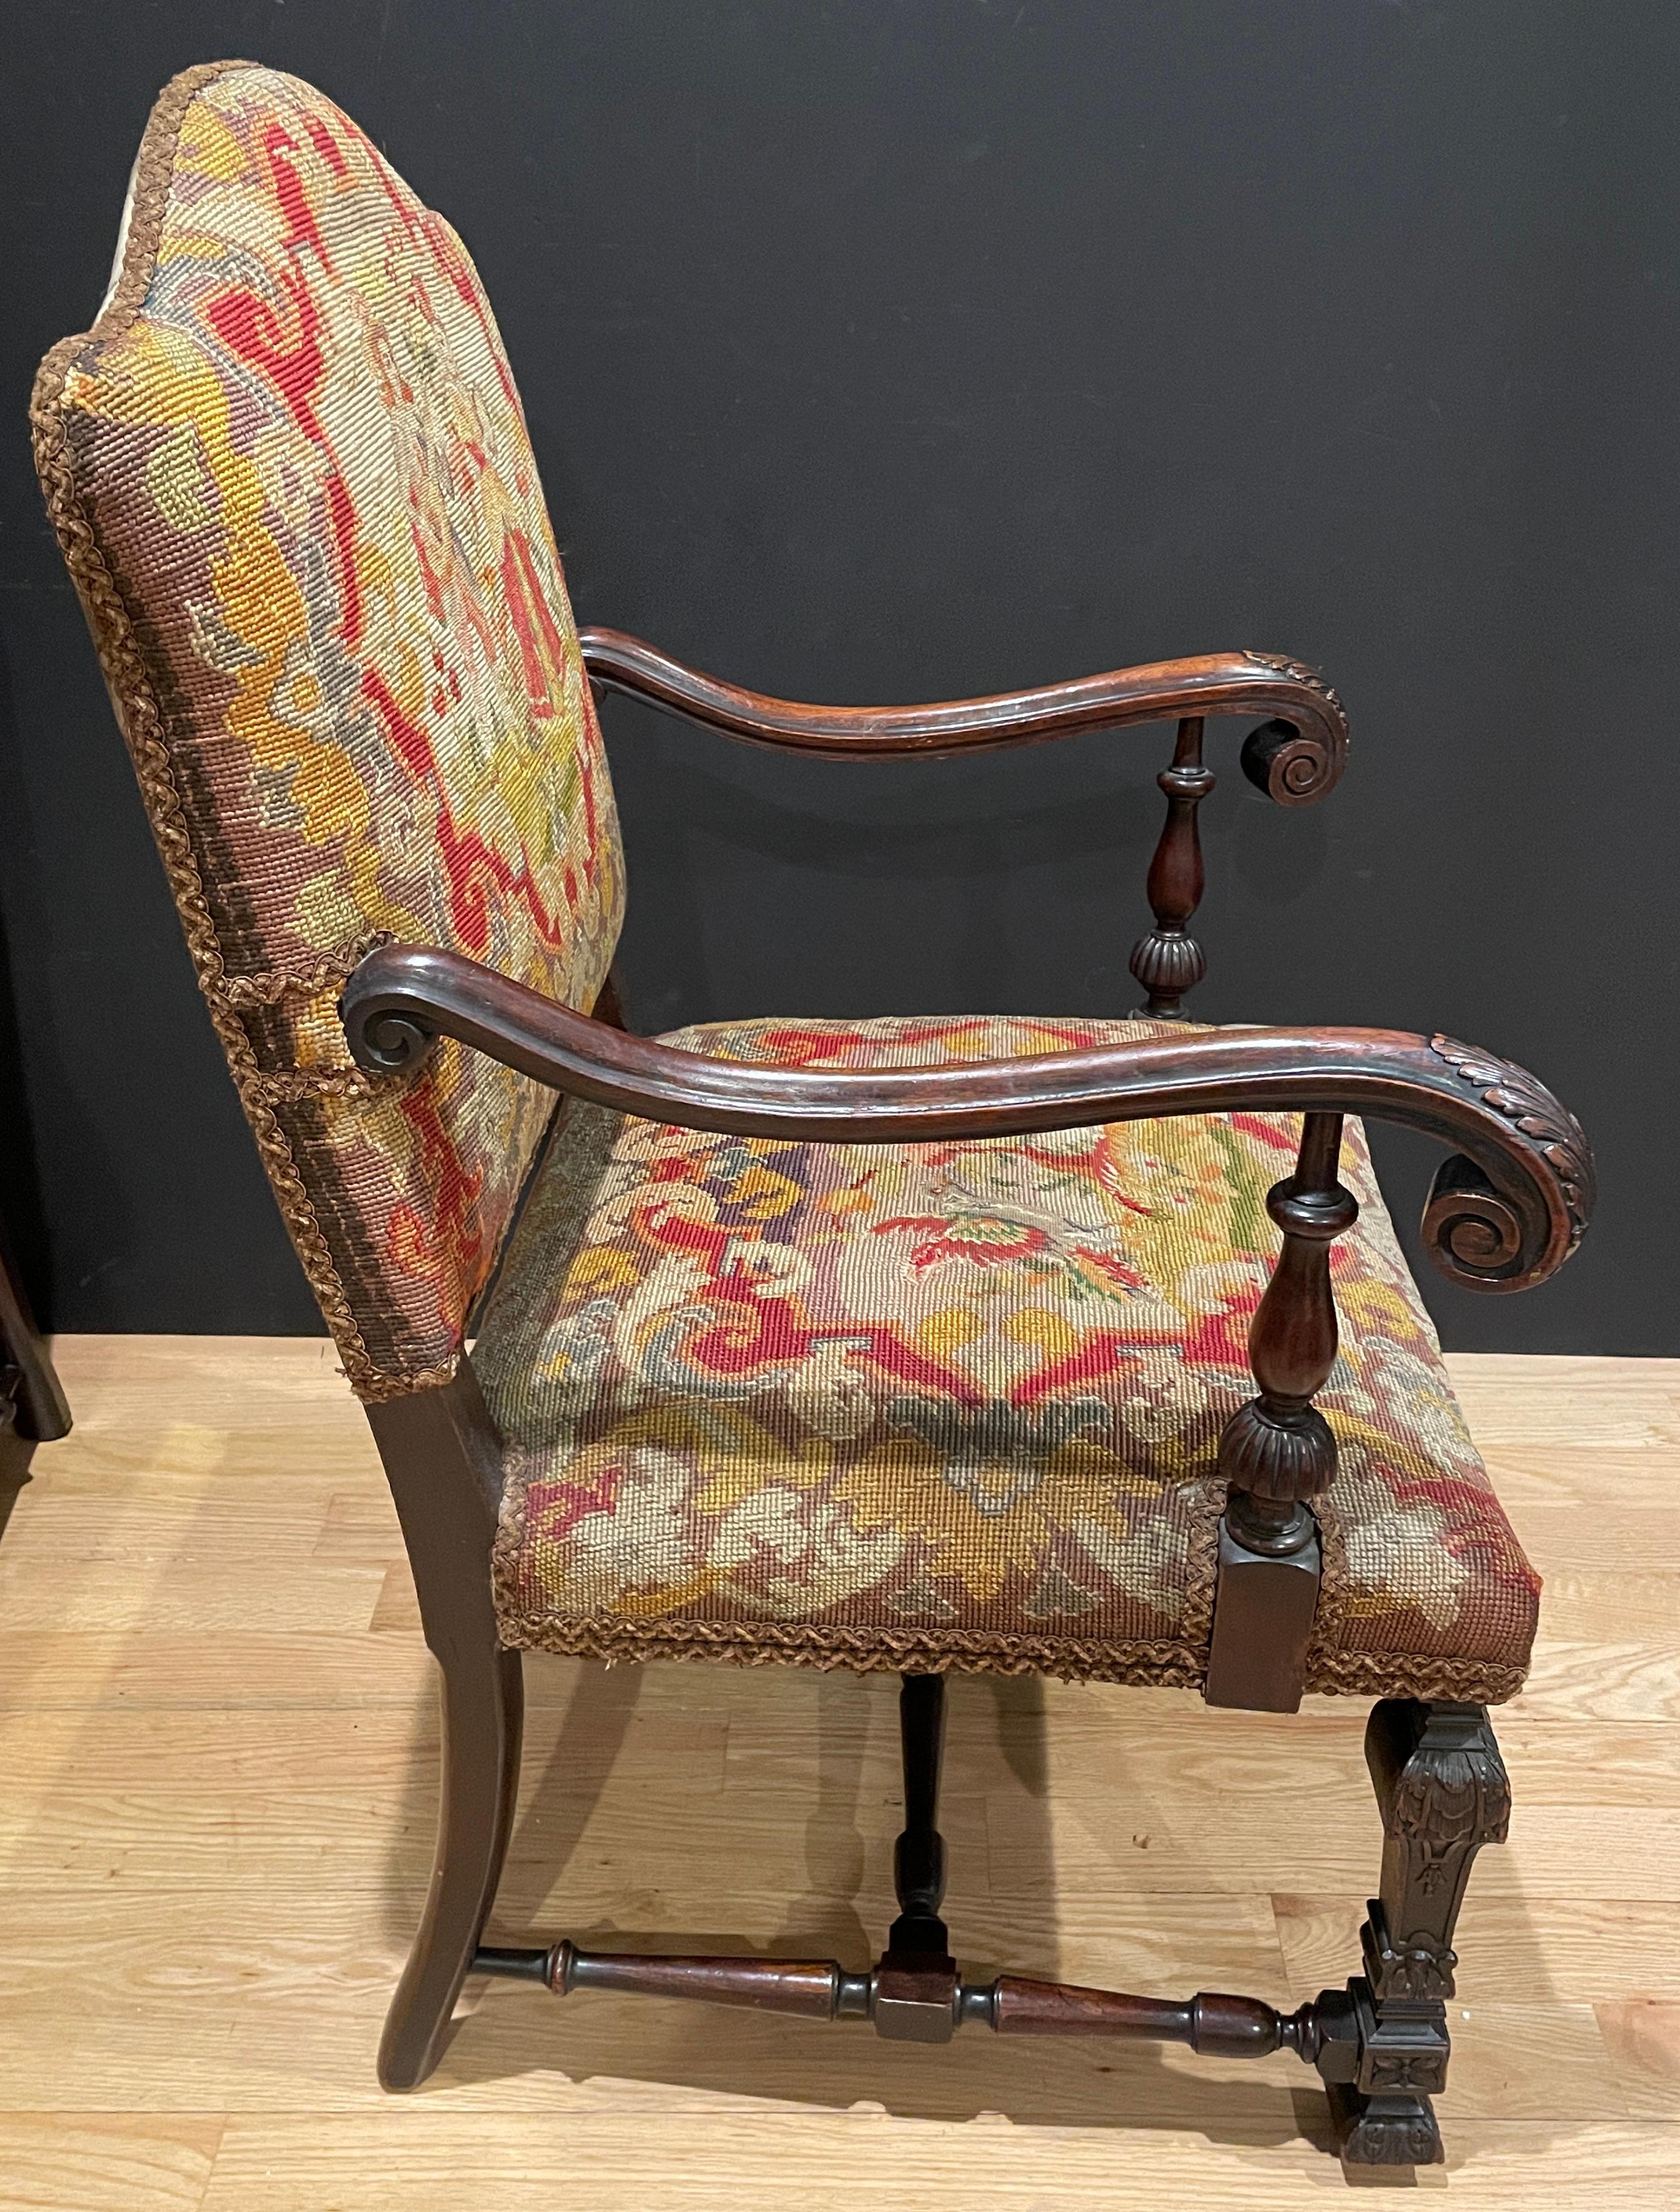 19th century carved walnut Renaissance Revival petit-point tapestry upholstered carved arm chairs. Original petit point tapestry seat and back. Different scenes on all four panels featuring musical and romantic scenes on backs and scenes with birds